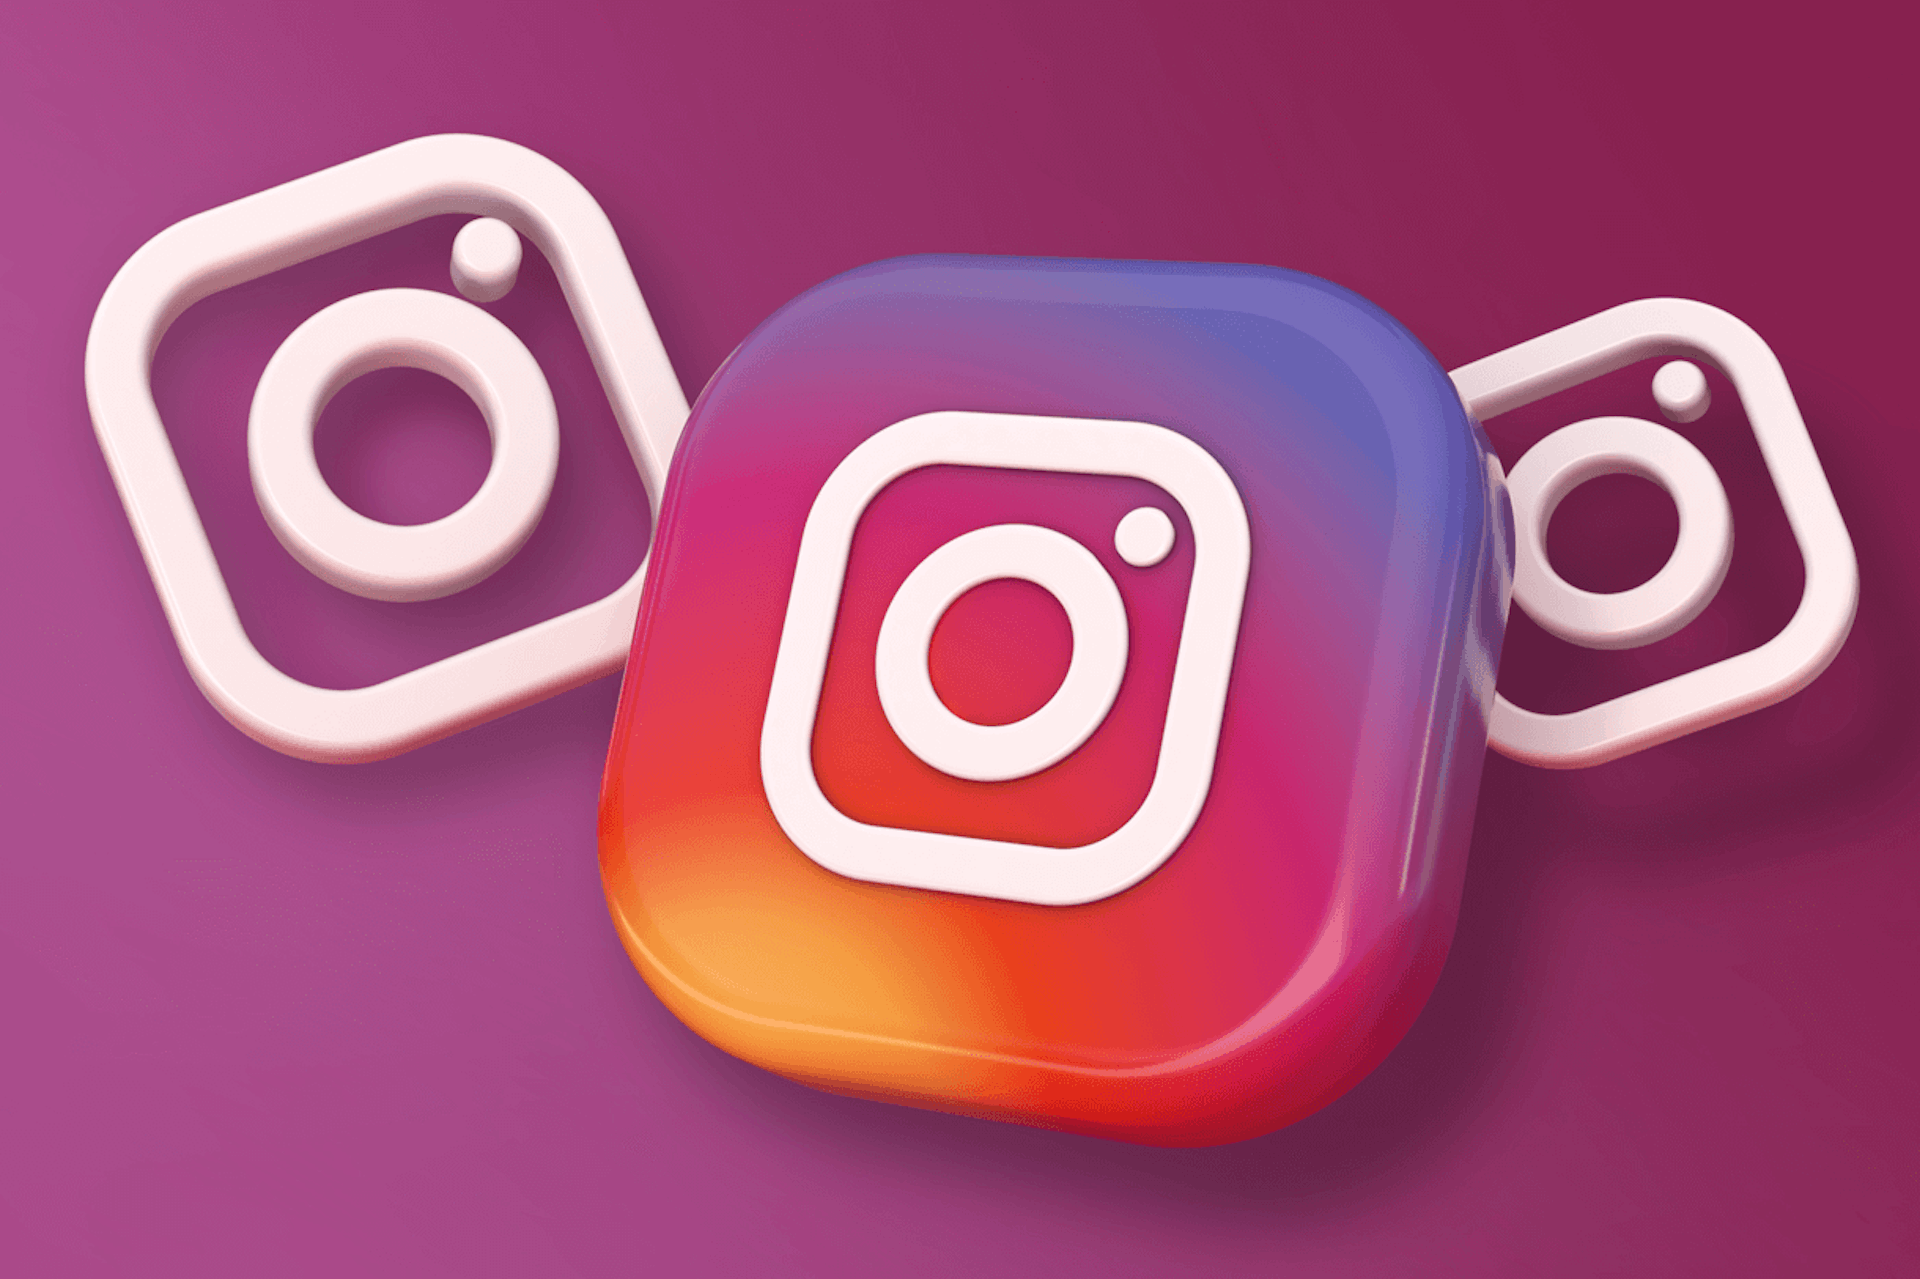 Image showing large Instagram logo in color, with two smaller Instagram logos in white on either side, on a dark purple background. B2B Instagram account examples blog post.